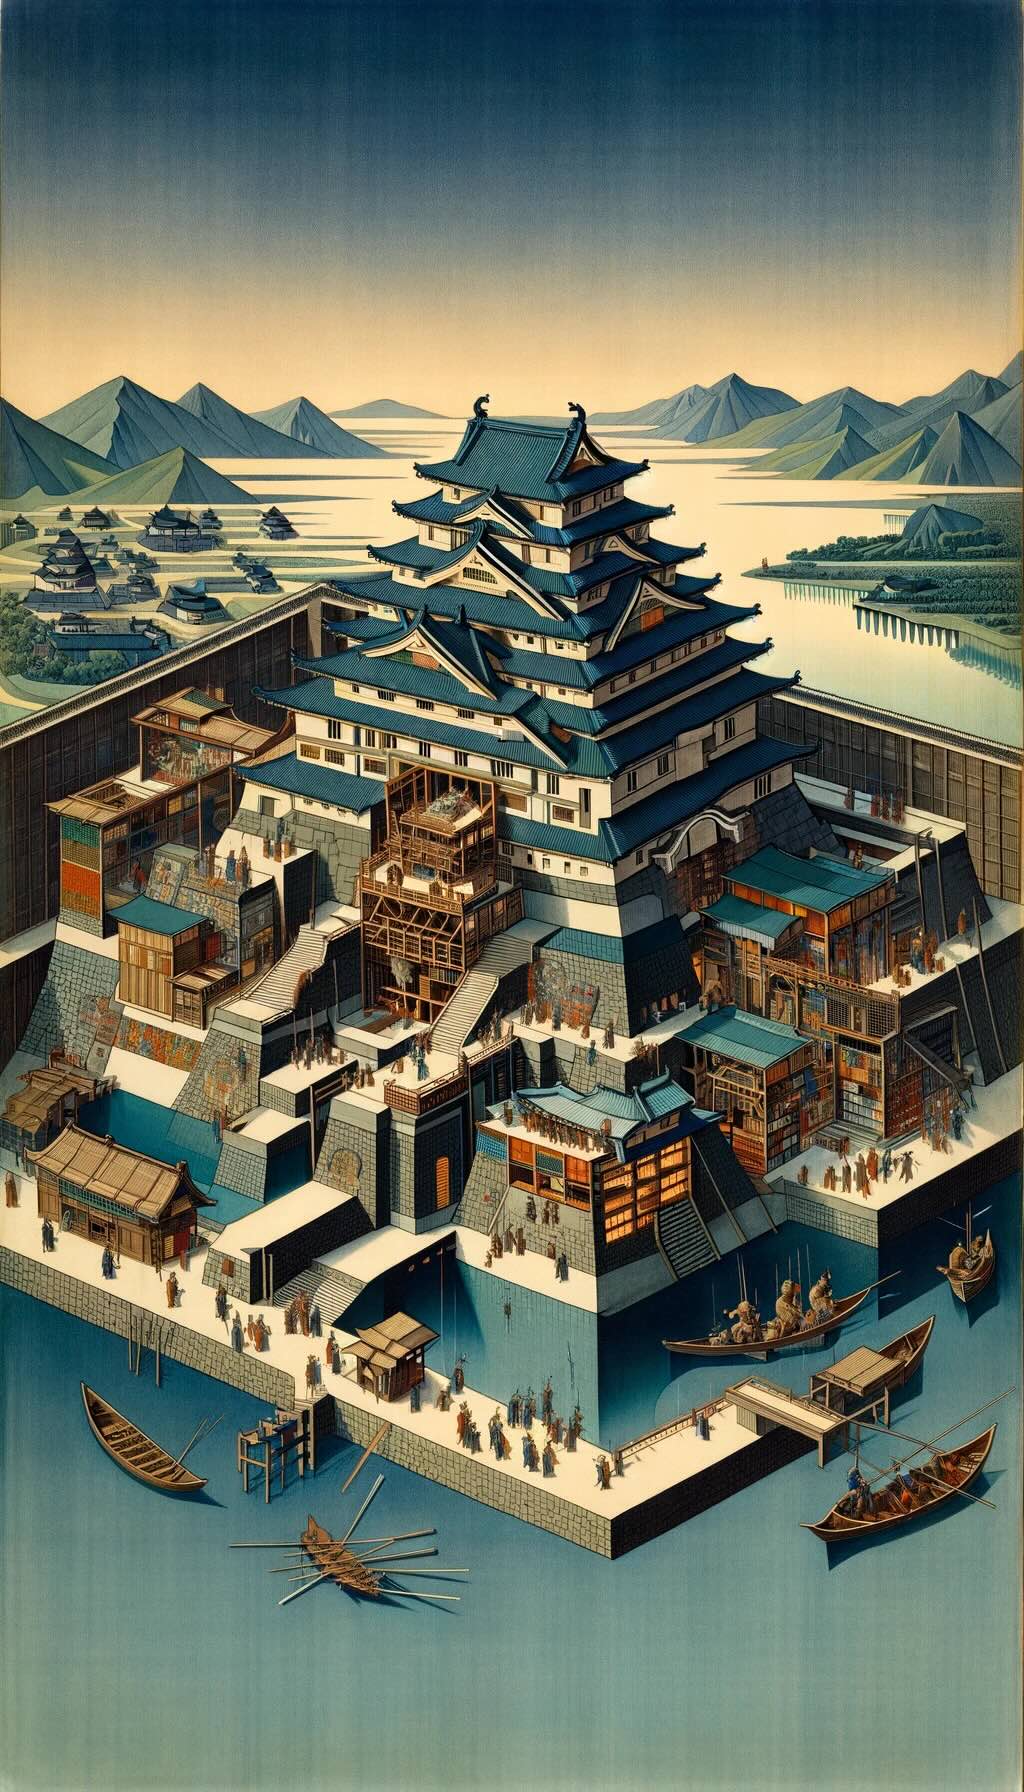 Japanese castle during the Sengoku Period represents the castle's role in warfare and administration, with its strategic design and bustling surroundings